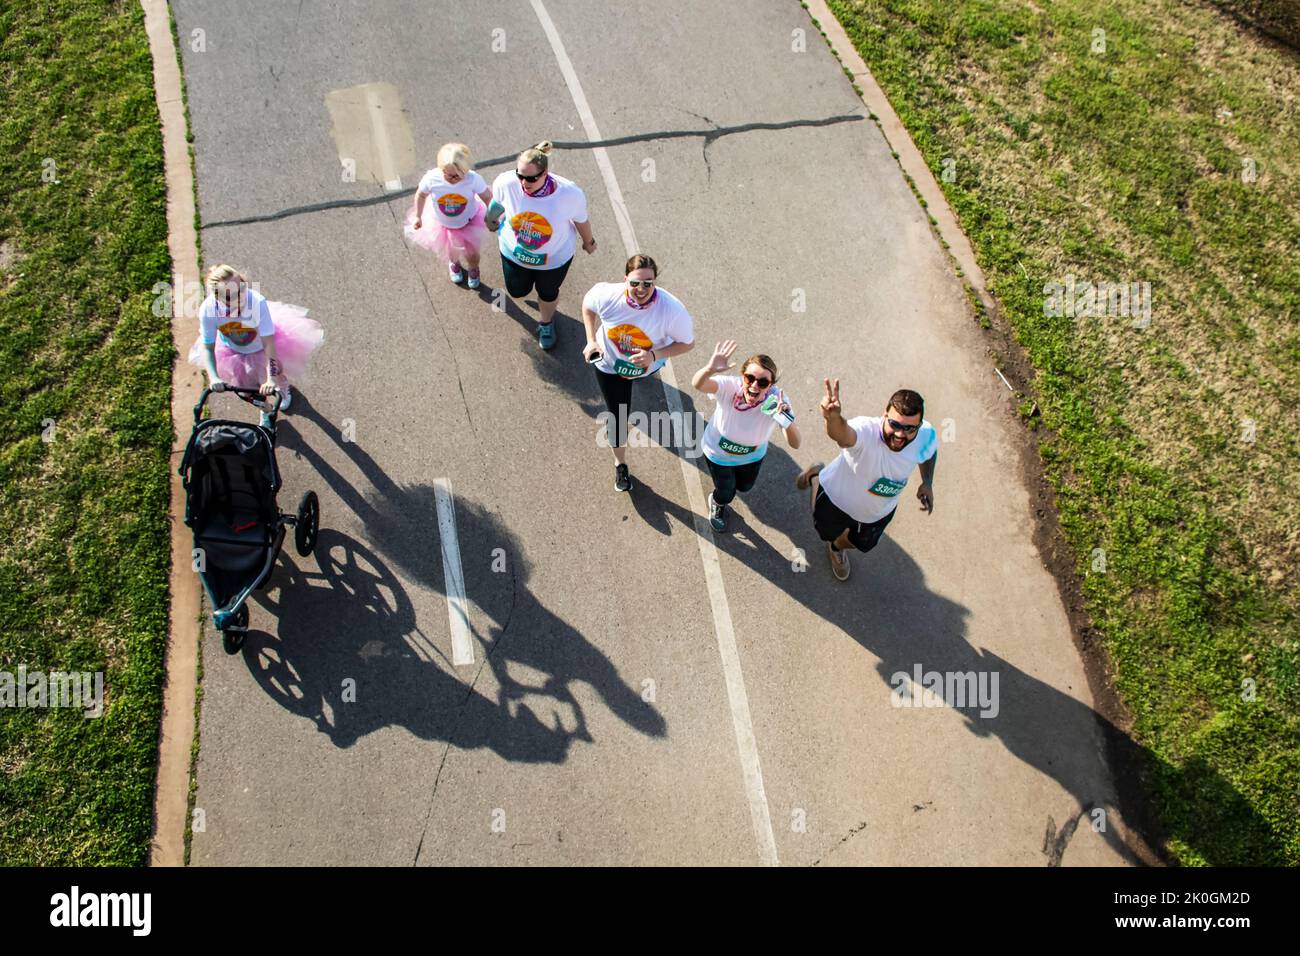 4-6-2019 Tulsa - Participants in Color Run viewed from above with dramatic shadows looking up and waving and giving peace sign - group includes a litt Stock Photo